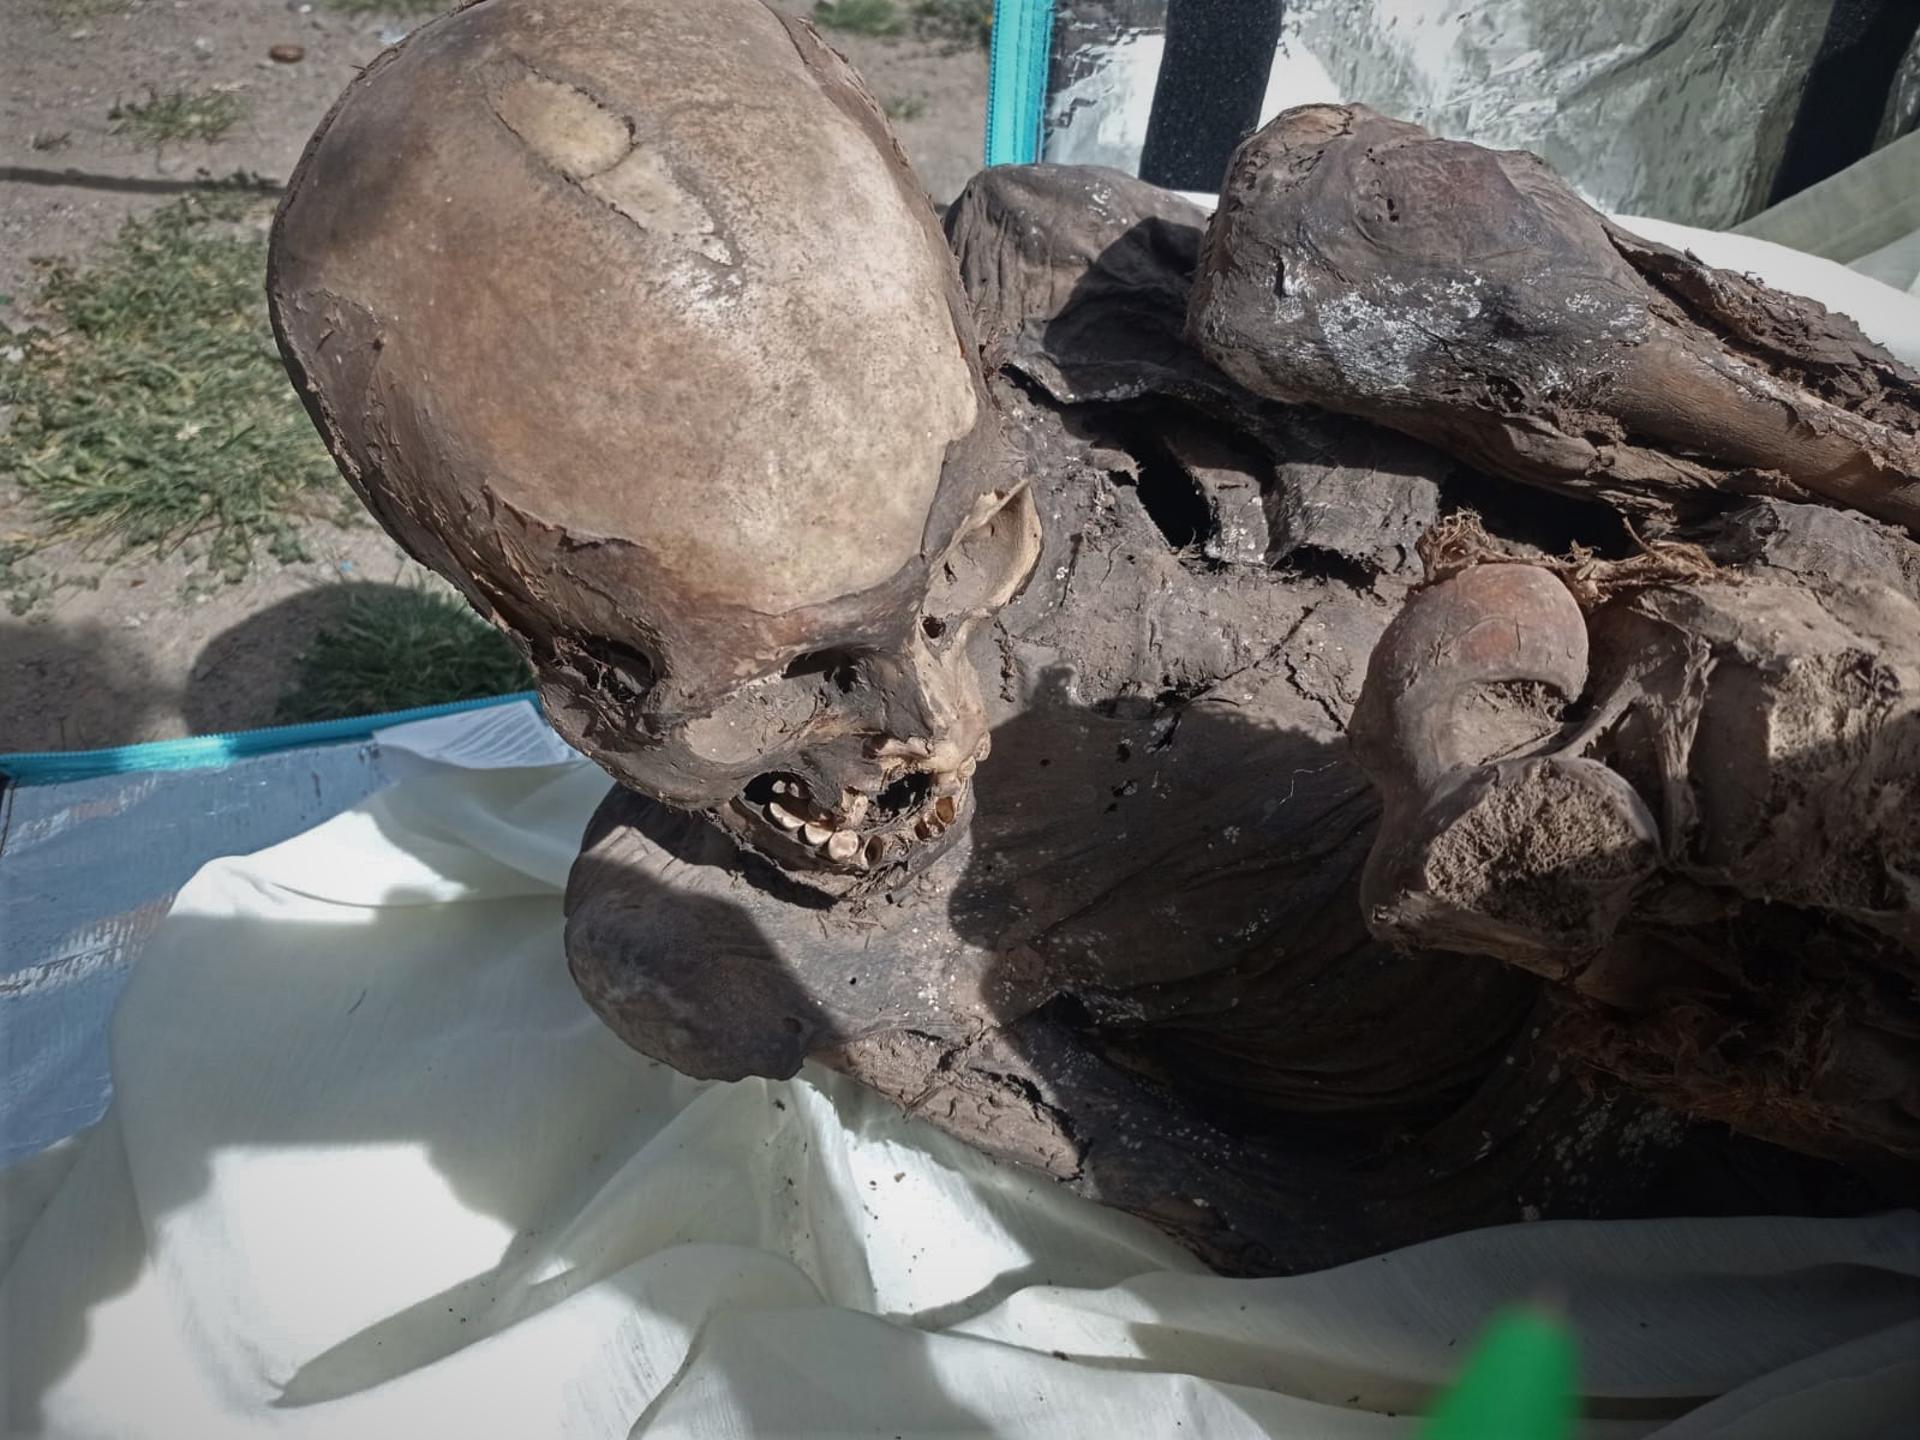 Delivery Man found with 800 year old mummy in a backpack